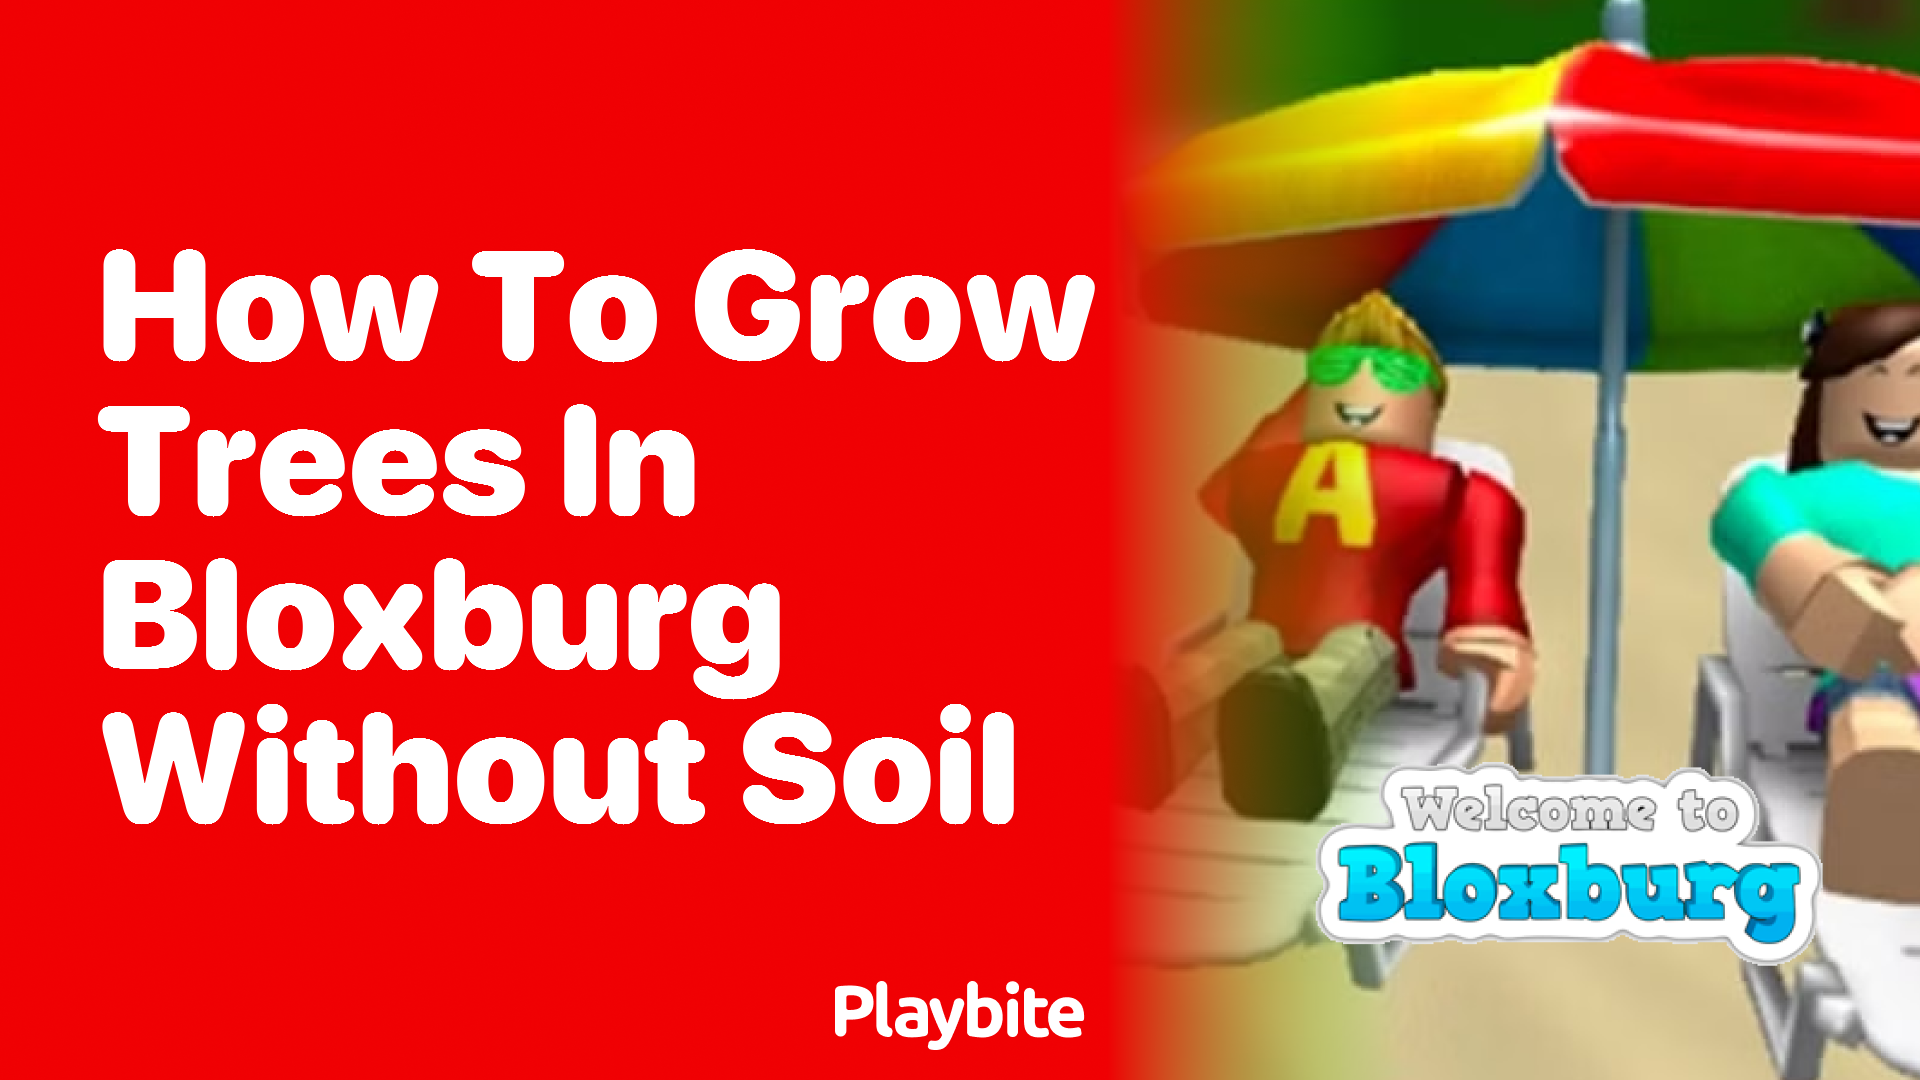 How to Grow Trees in Bloxburg Without Soil